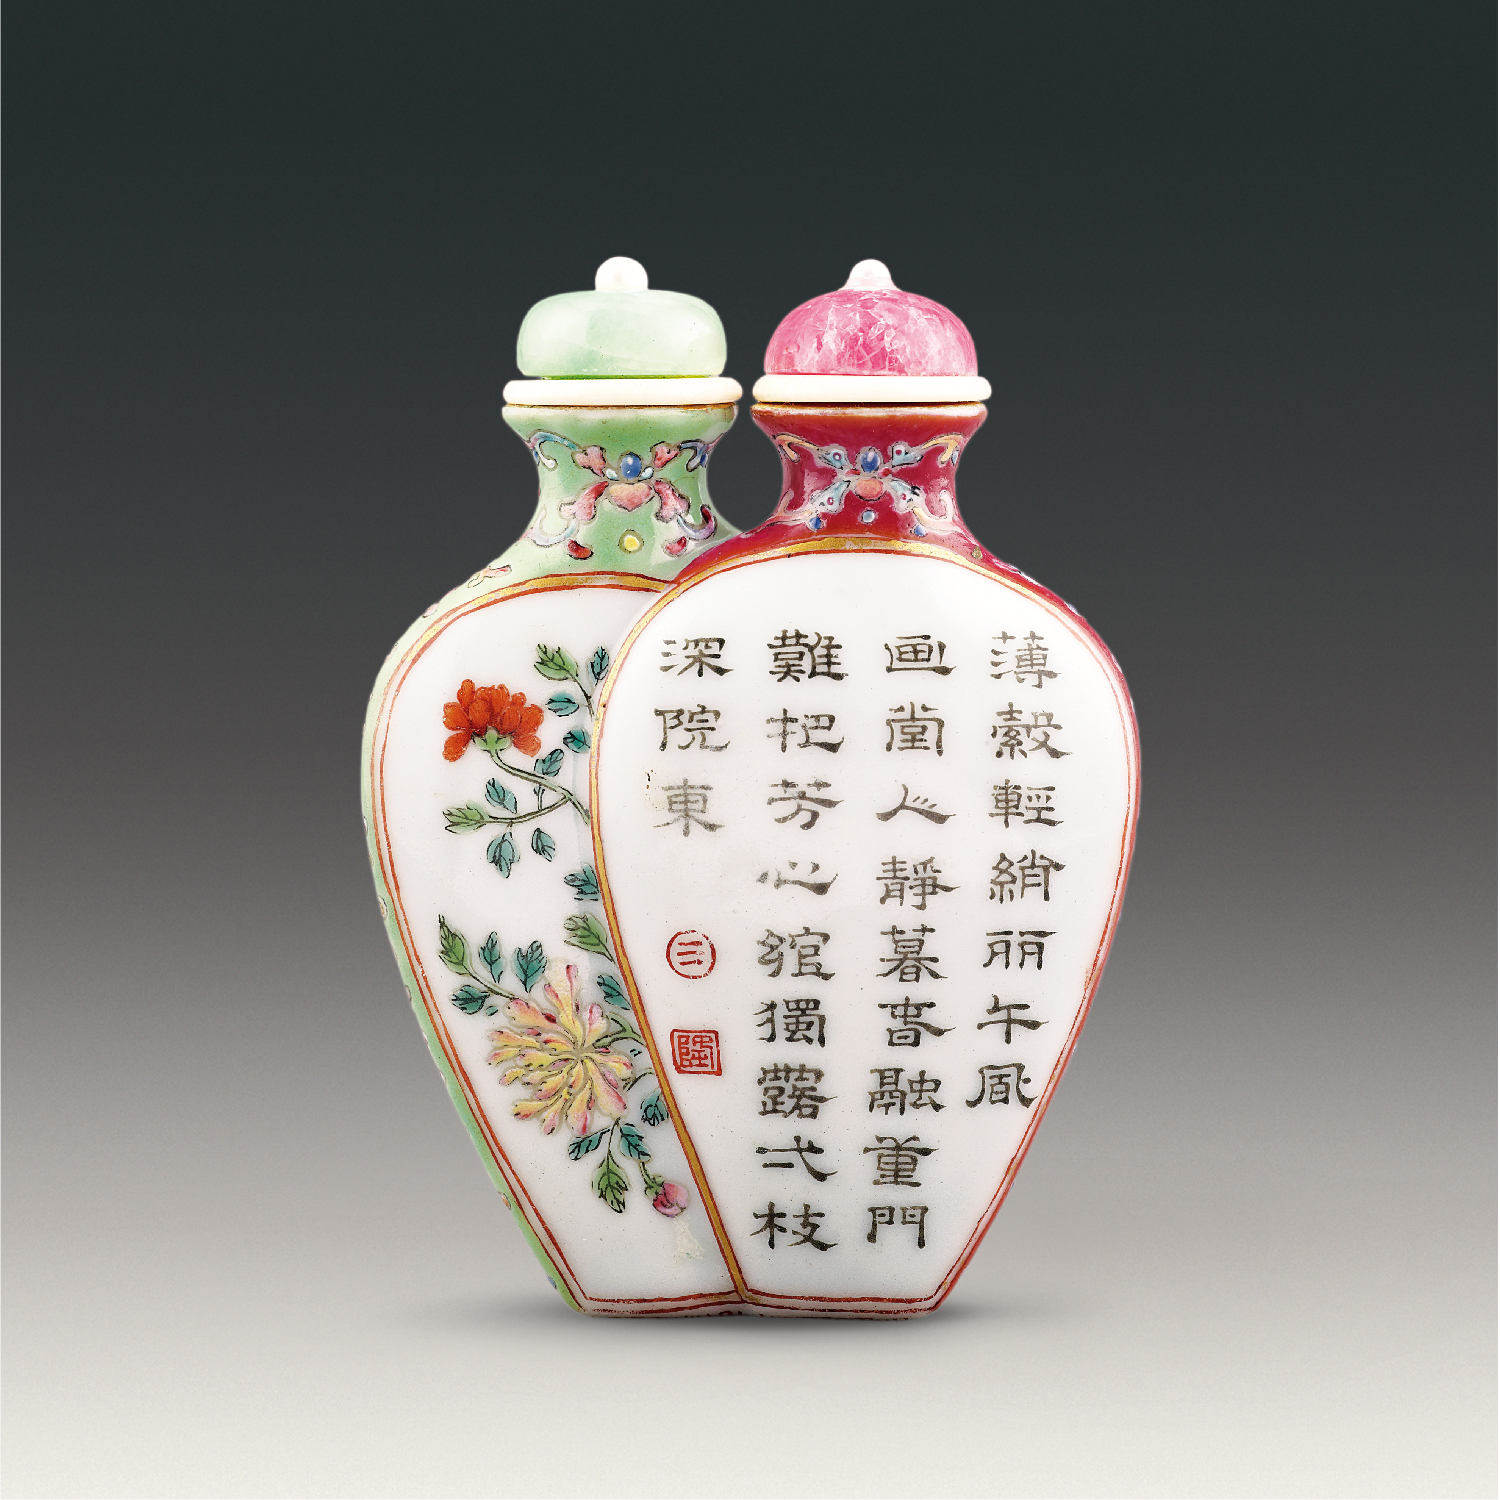 Coupled-vase-shaped snuff bottle with imperial poem inscription and floral design in fencai enamels